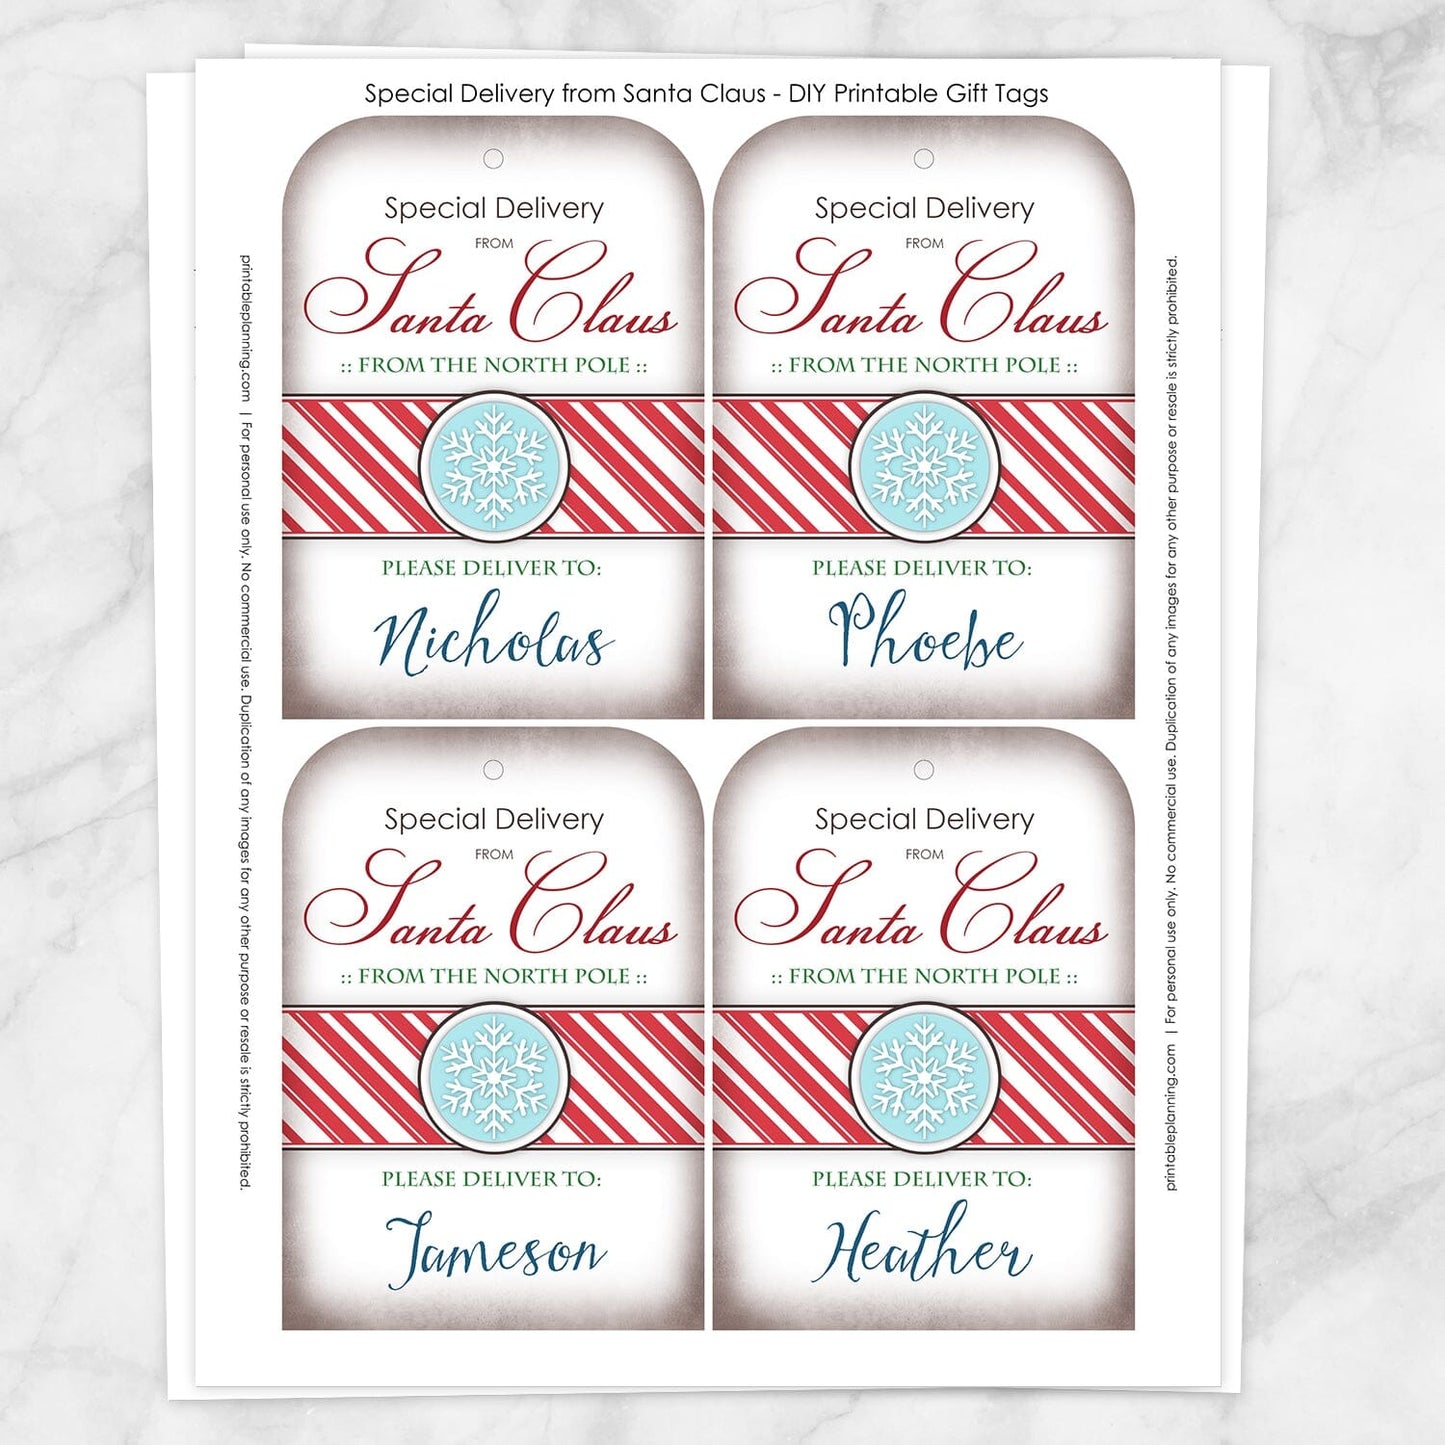 Printable Special Delivery from Santa Claus - Personalized Gift Tags at Printable Planning. Sheet of 4 gift tags.